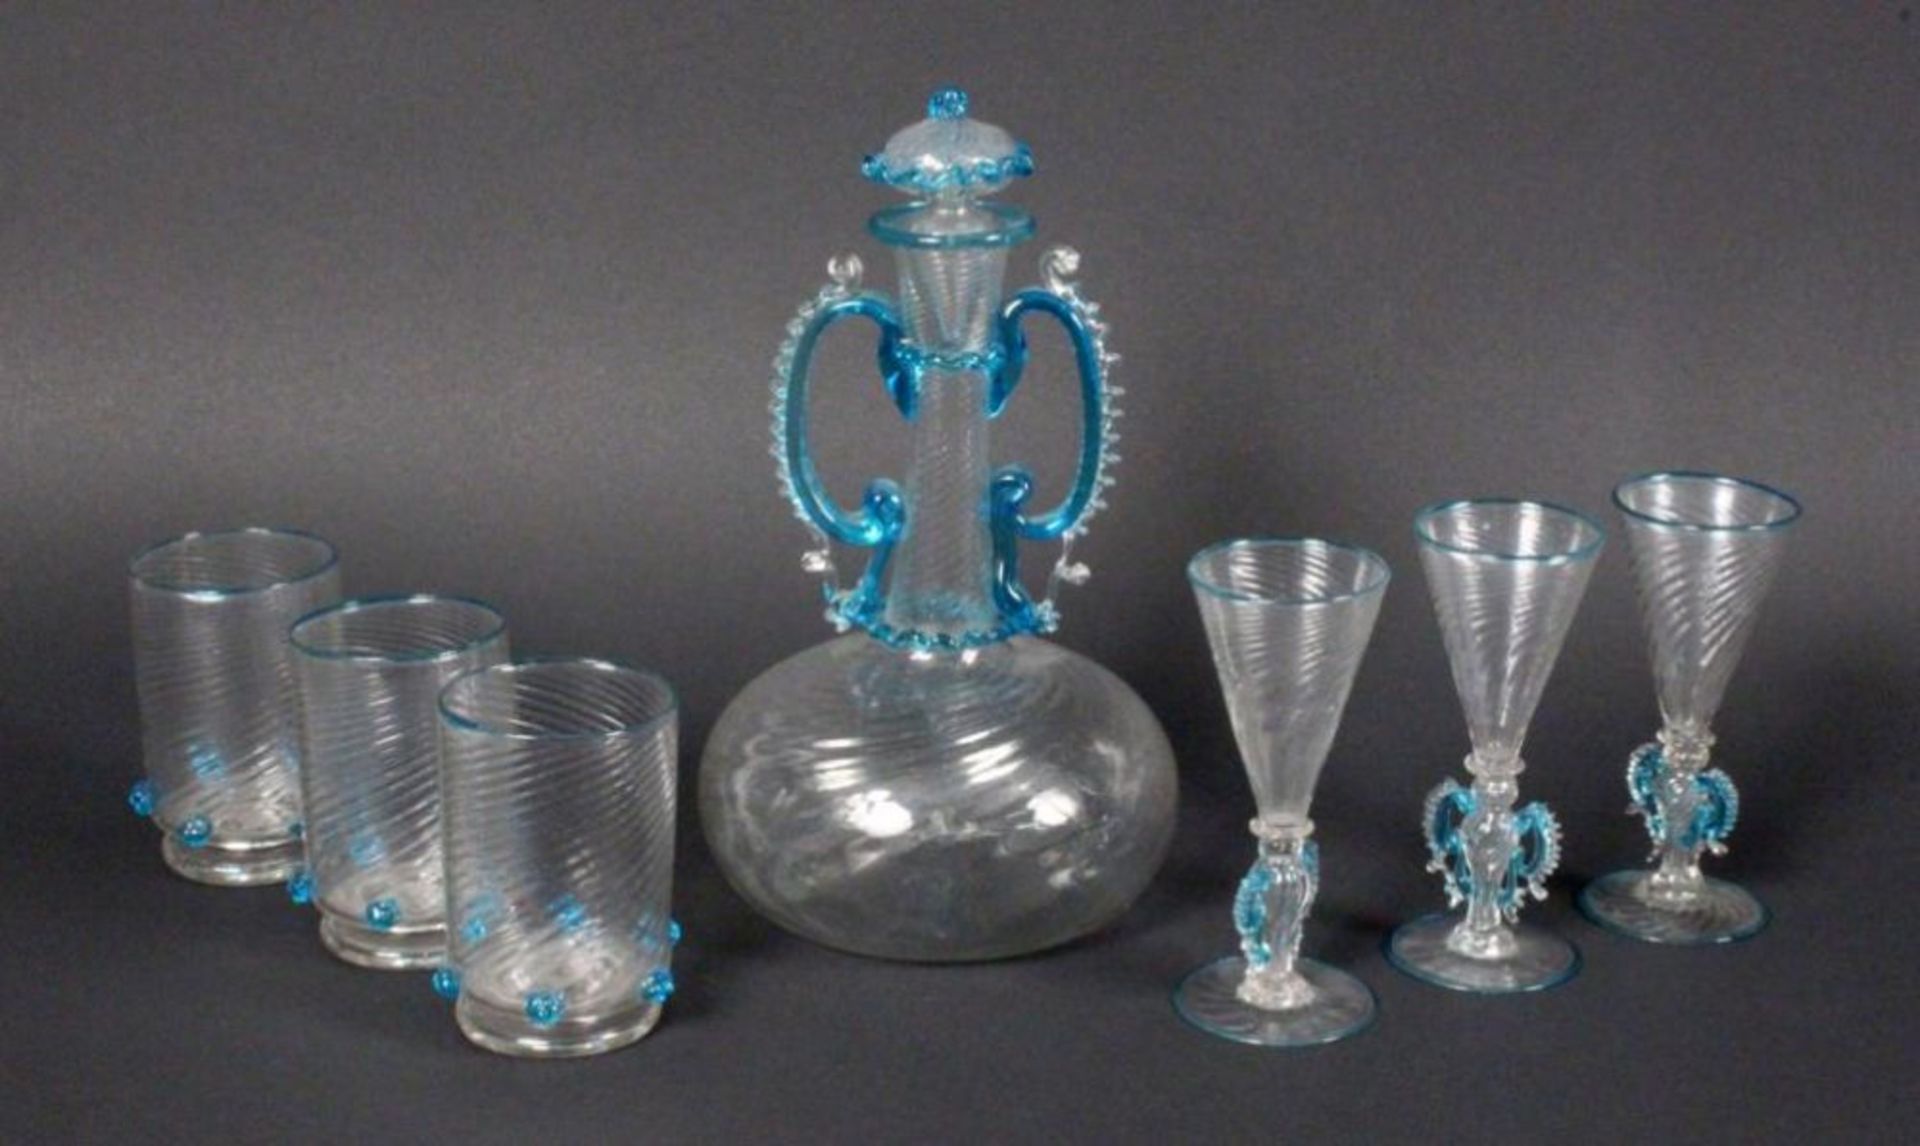 A 19TH CENTURY ART NOUVEAU LIQUEUR SET Colorless and blue glass consisting of a decanter with